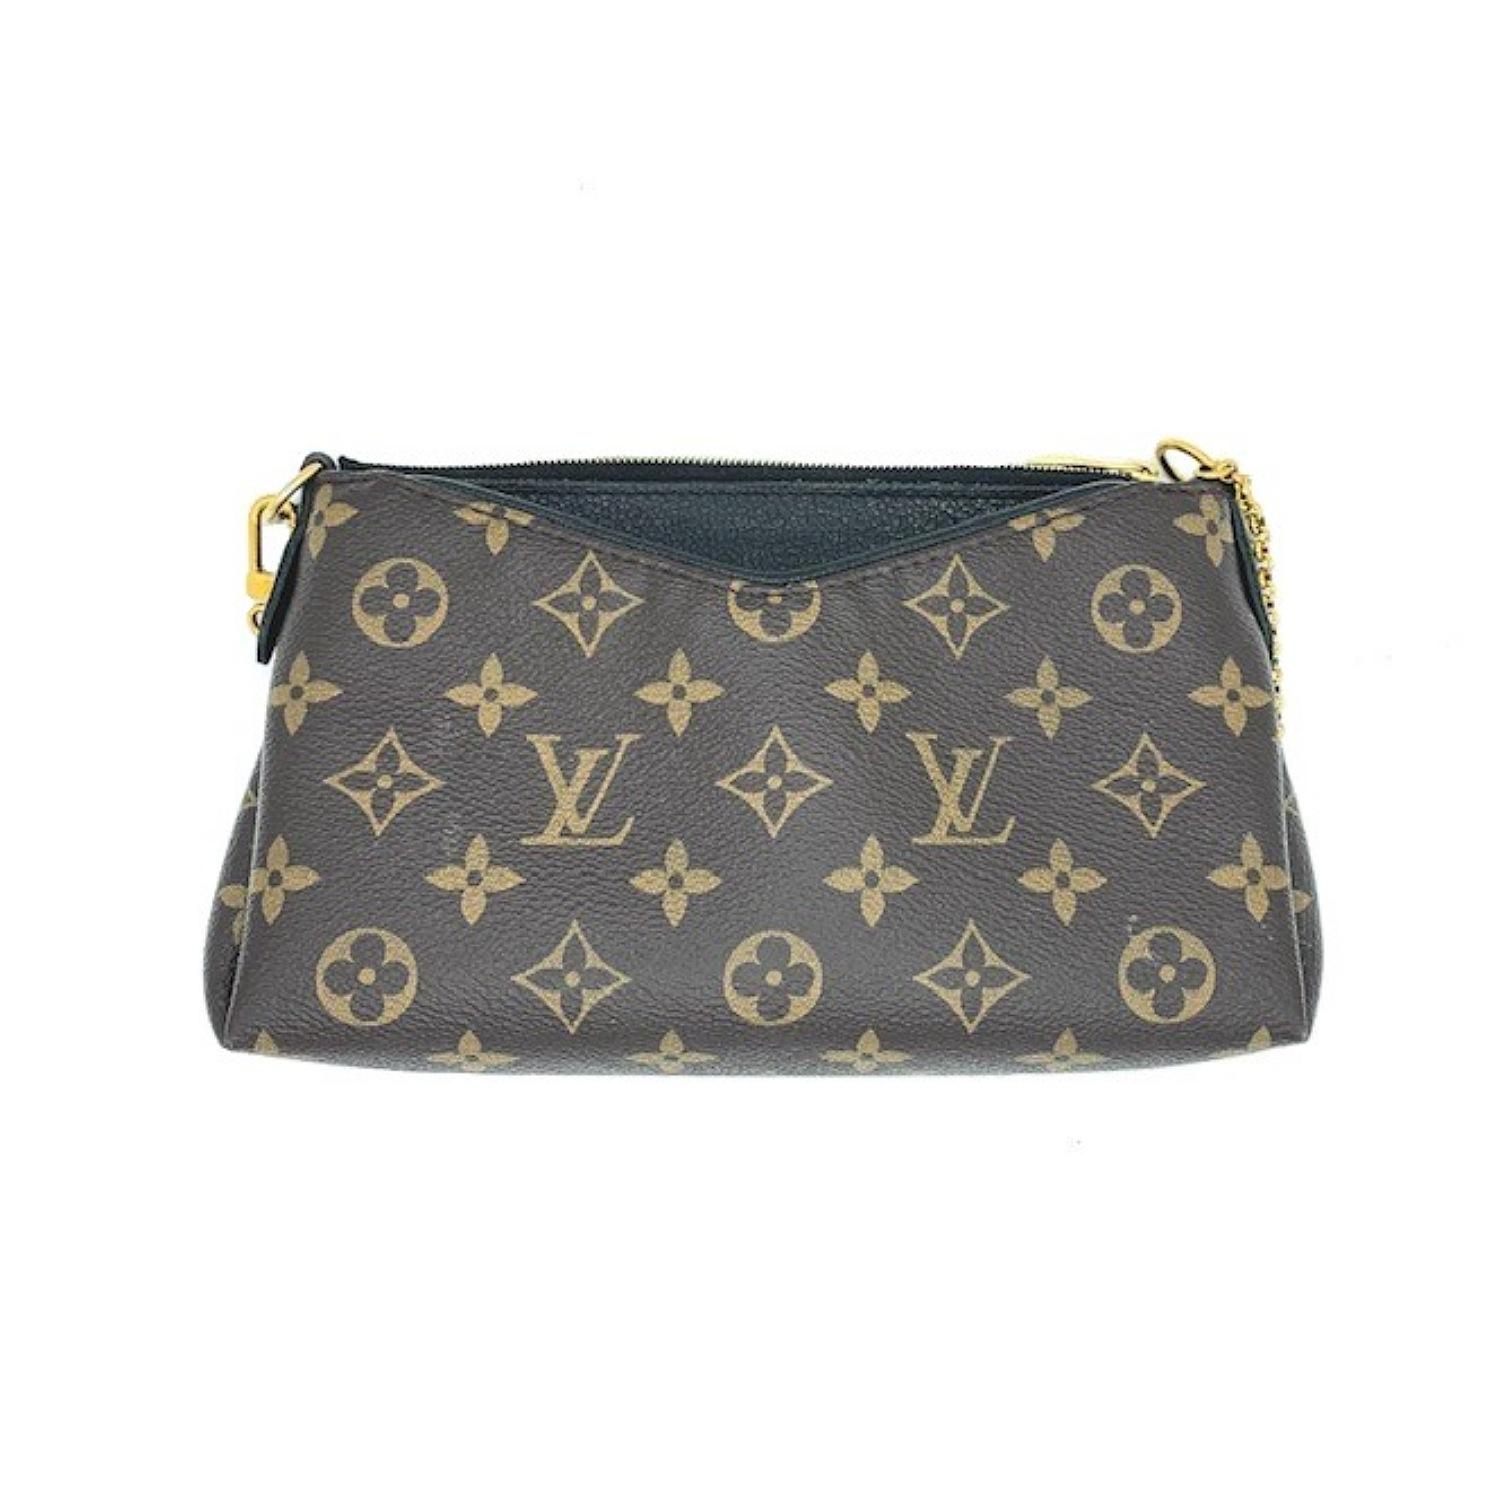 This chic shoulder bag is crafted of classic Louis Vuitton monogram on toile canvas, with textured black leather trim. The bag features a polished brass chain-link wristlet strap and an optional toffee brown leather shoulder strap. The top zipper